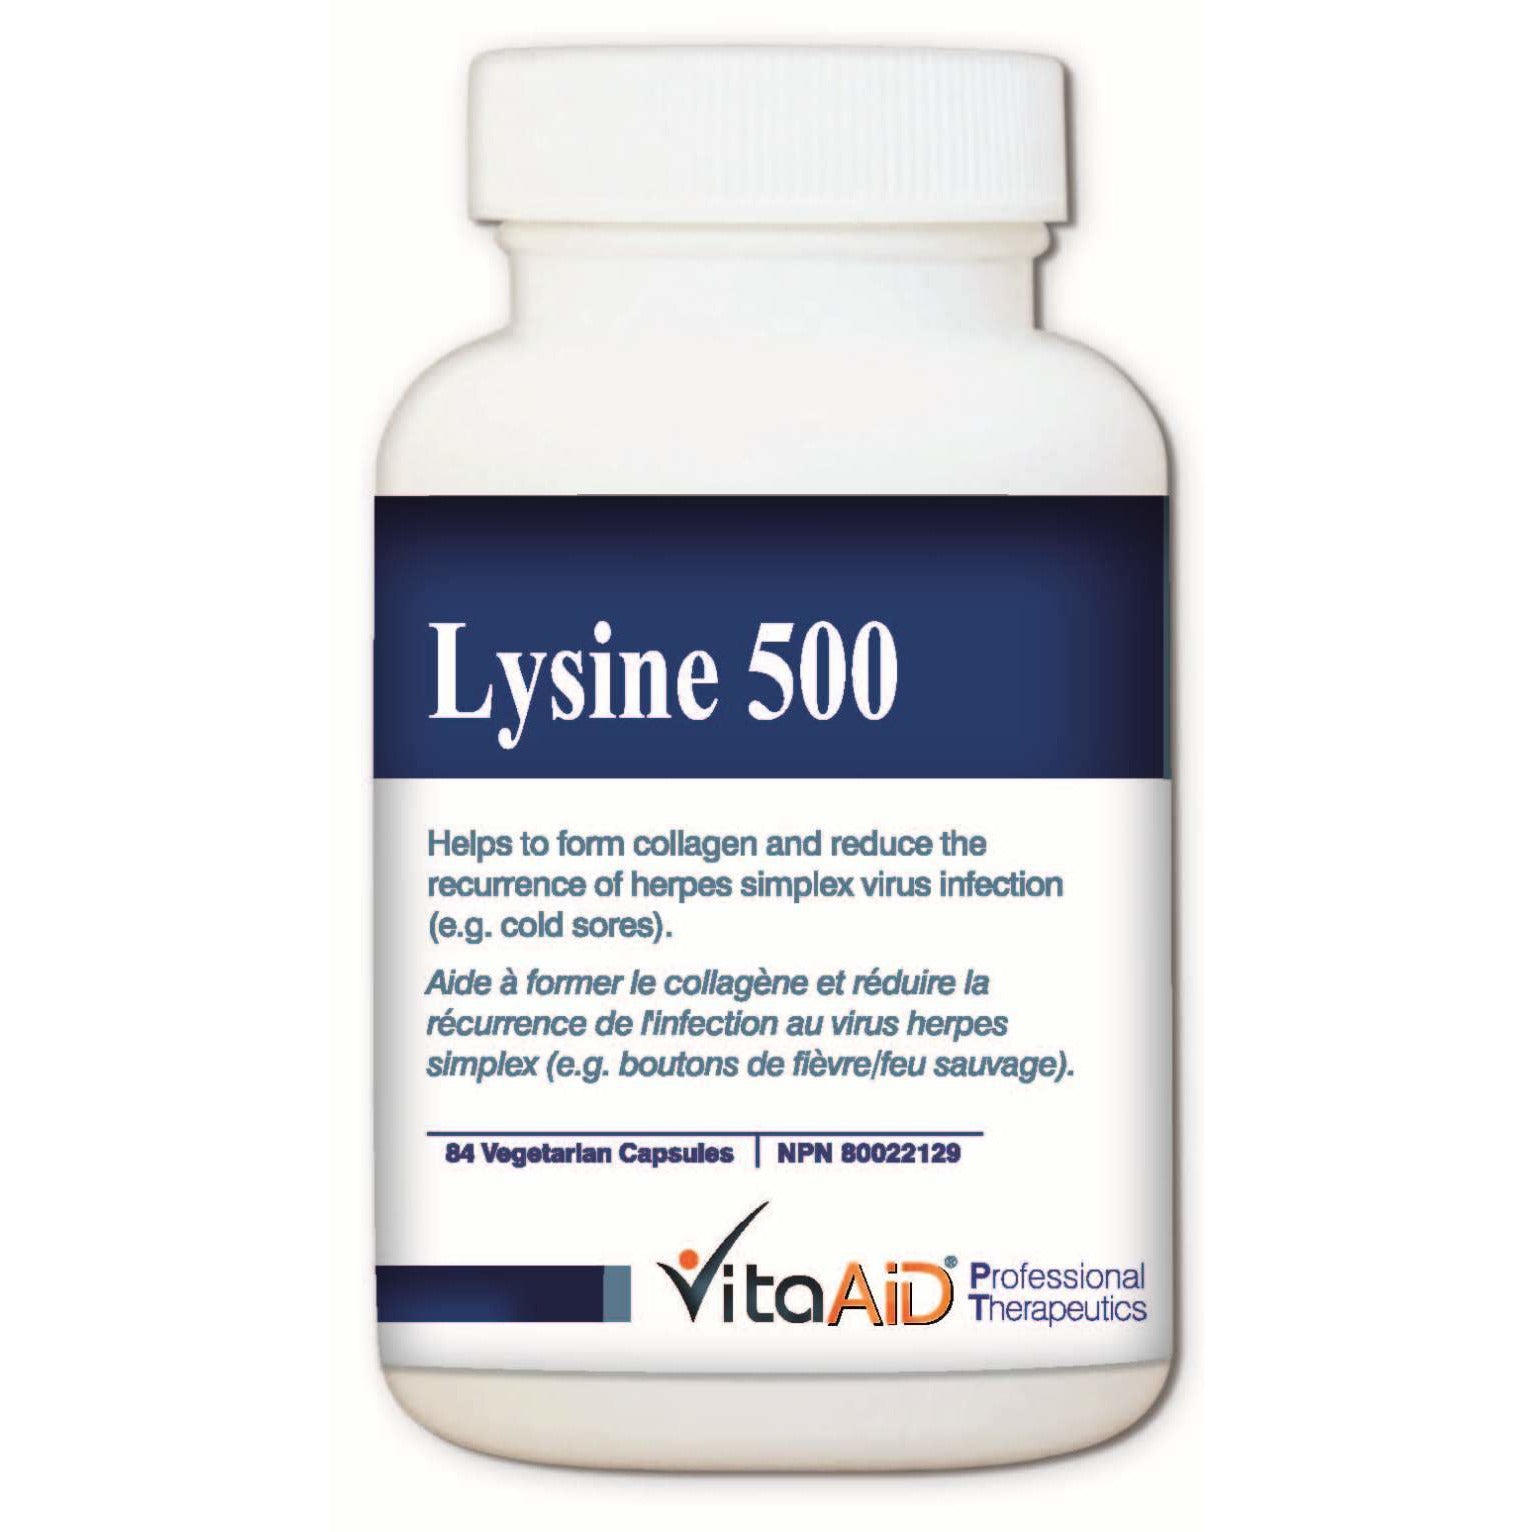 Lysine 500 Help reduce the recurrence of herpes simplex virus (HSV) infections (eg. cold sores) 84 veg caps